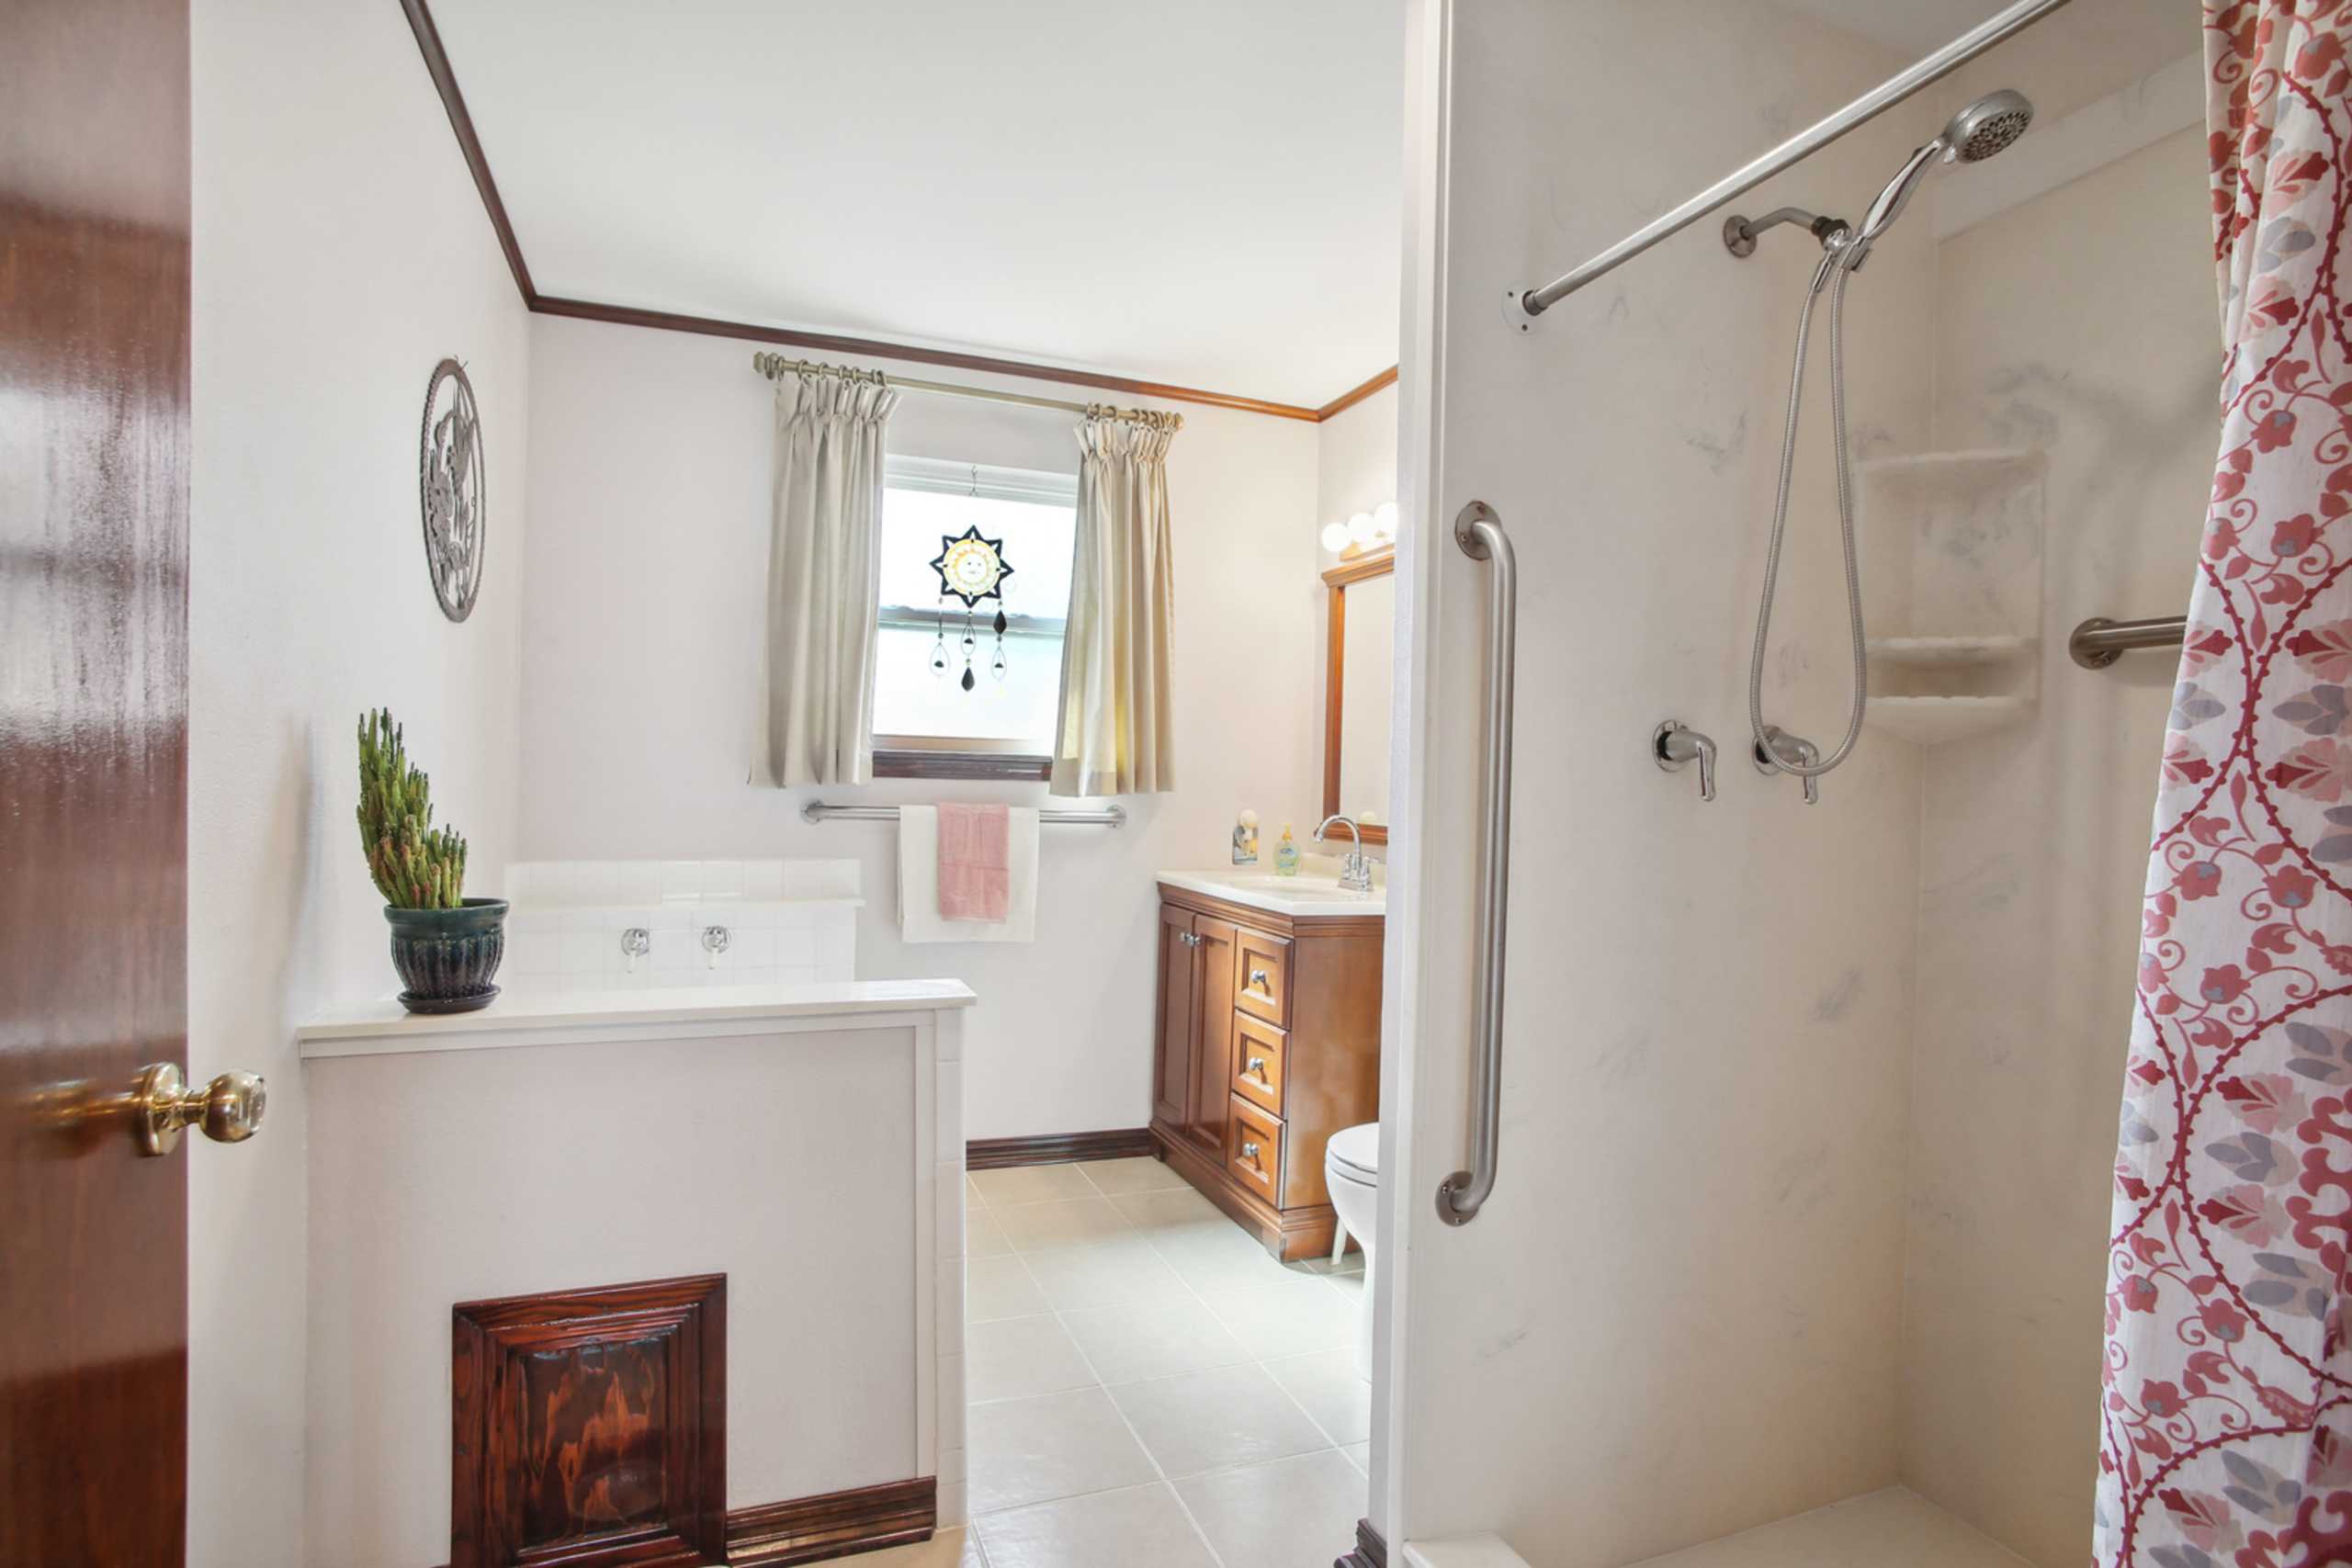 This modest Bathroom with safety features in the separate shower lives large!